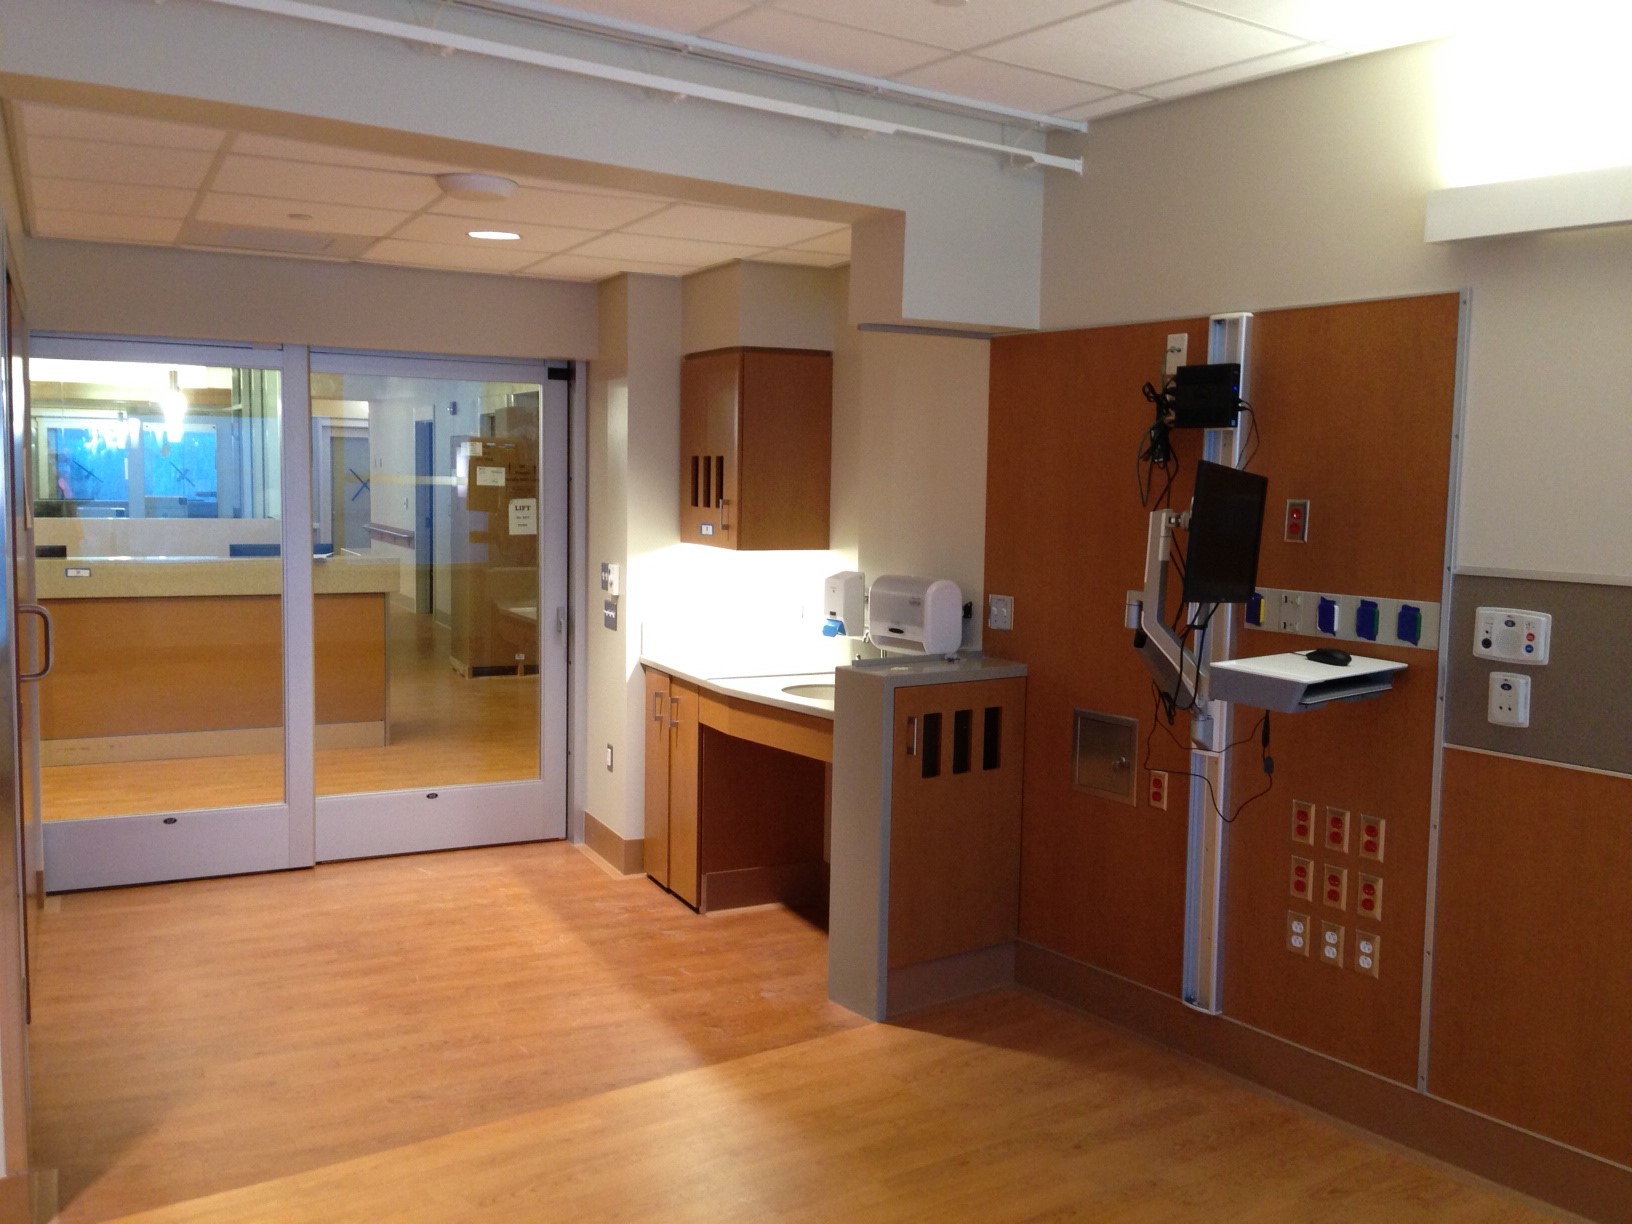 Patient rooms in the new hospital tower at UConn Health are private and larger. Most will have ceiling lifts that minimize fall risk to patients and injury risk to clinical staff. (Photo by Frank Barton)